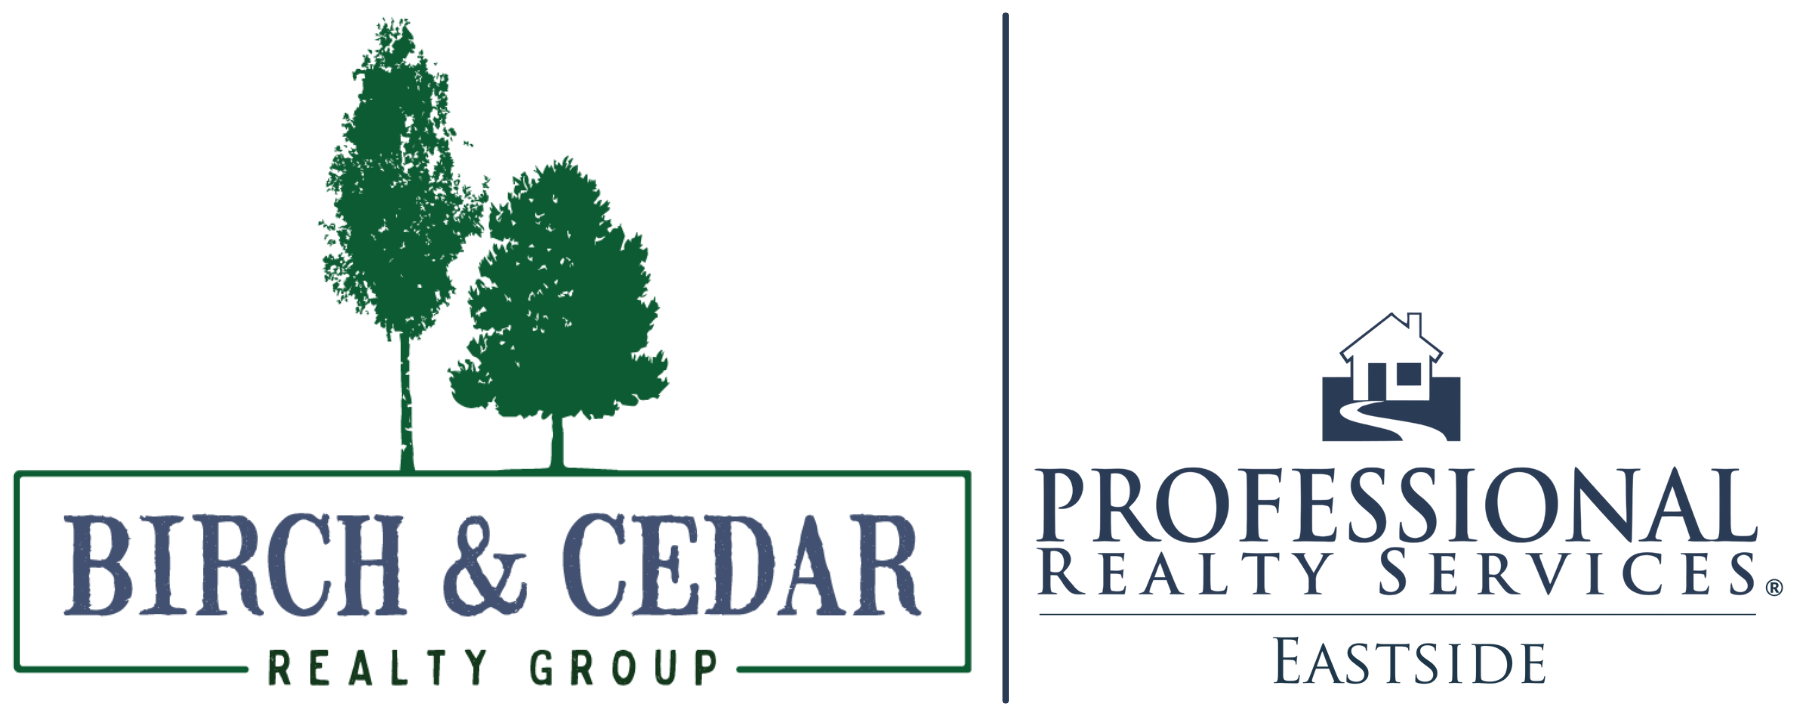 Birch & Cedar Realty Group brokered by Professional Realty Services Eastside logo